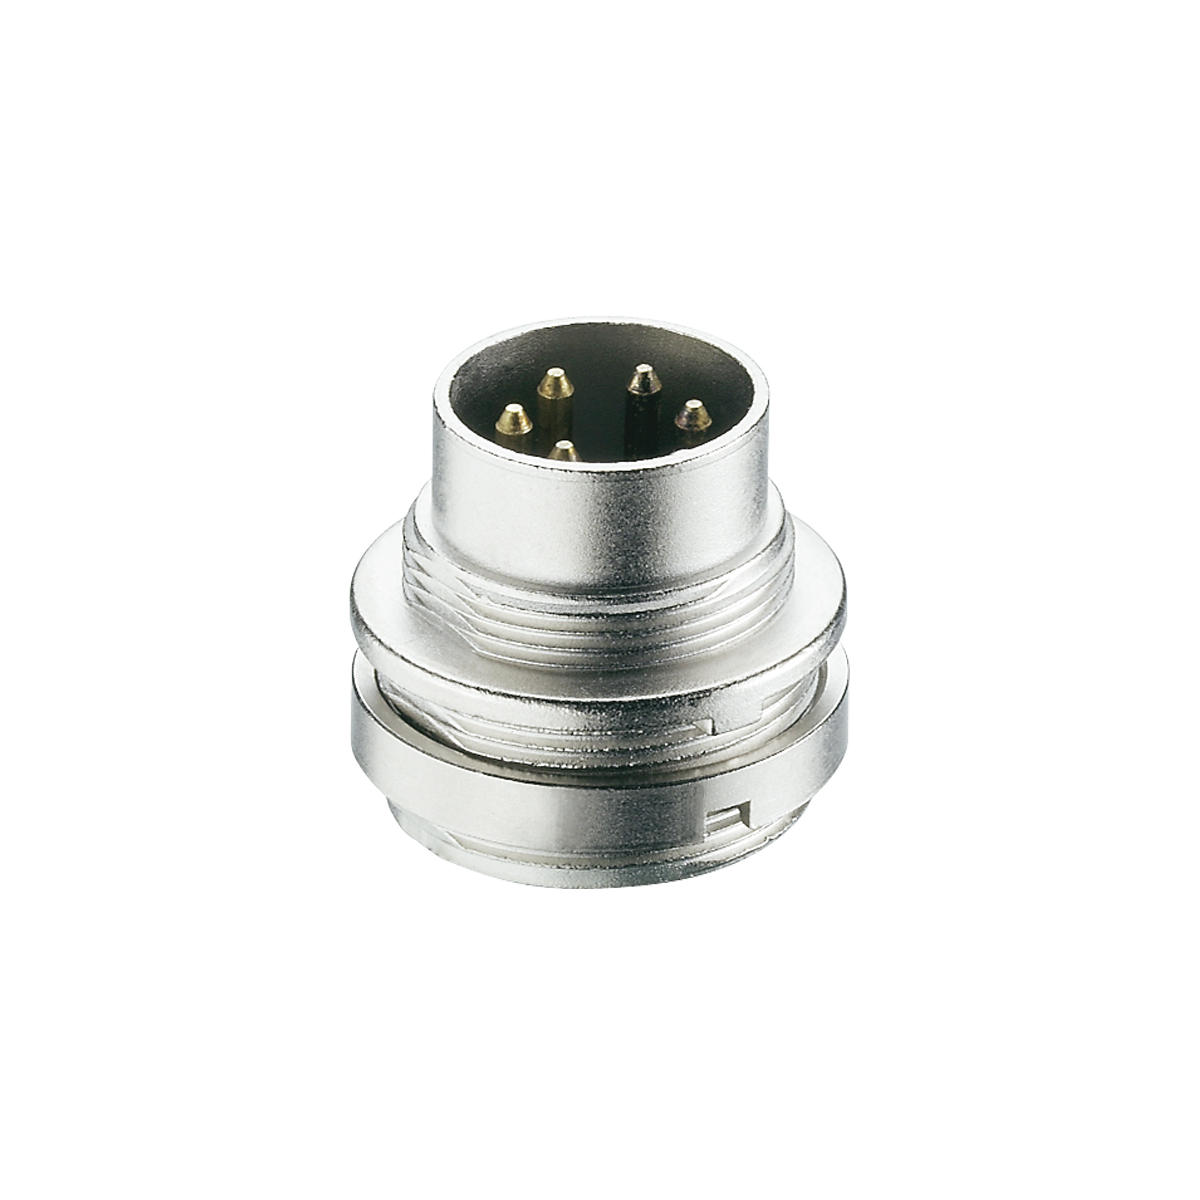 Lumberg: SFV (Series 03 | Circular connectors with threaded joint M16 acc. to IEC 61076-2-106, IP40/IP68)